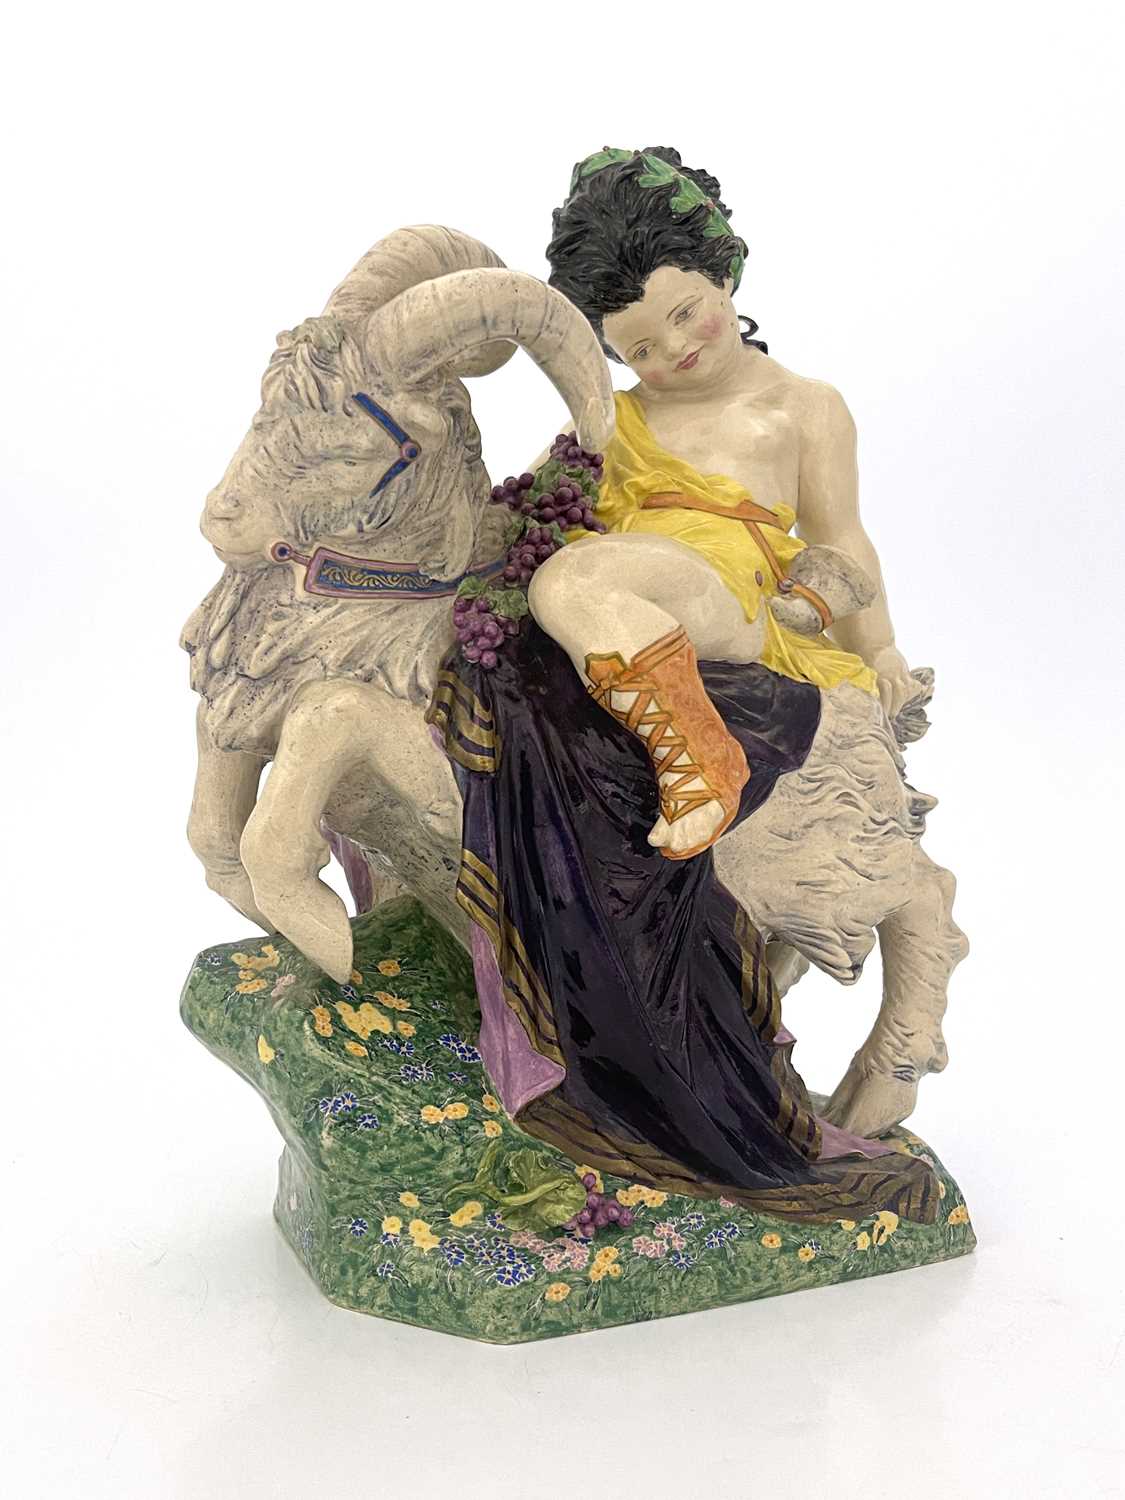 Charles Vyse for Chelsea Pottery, Bacchus on a Goat, 1921, modelled as a Classical boy on a - Image 5 of 9